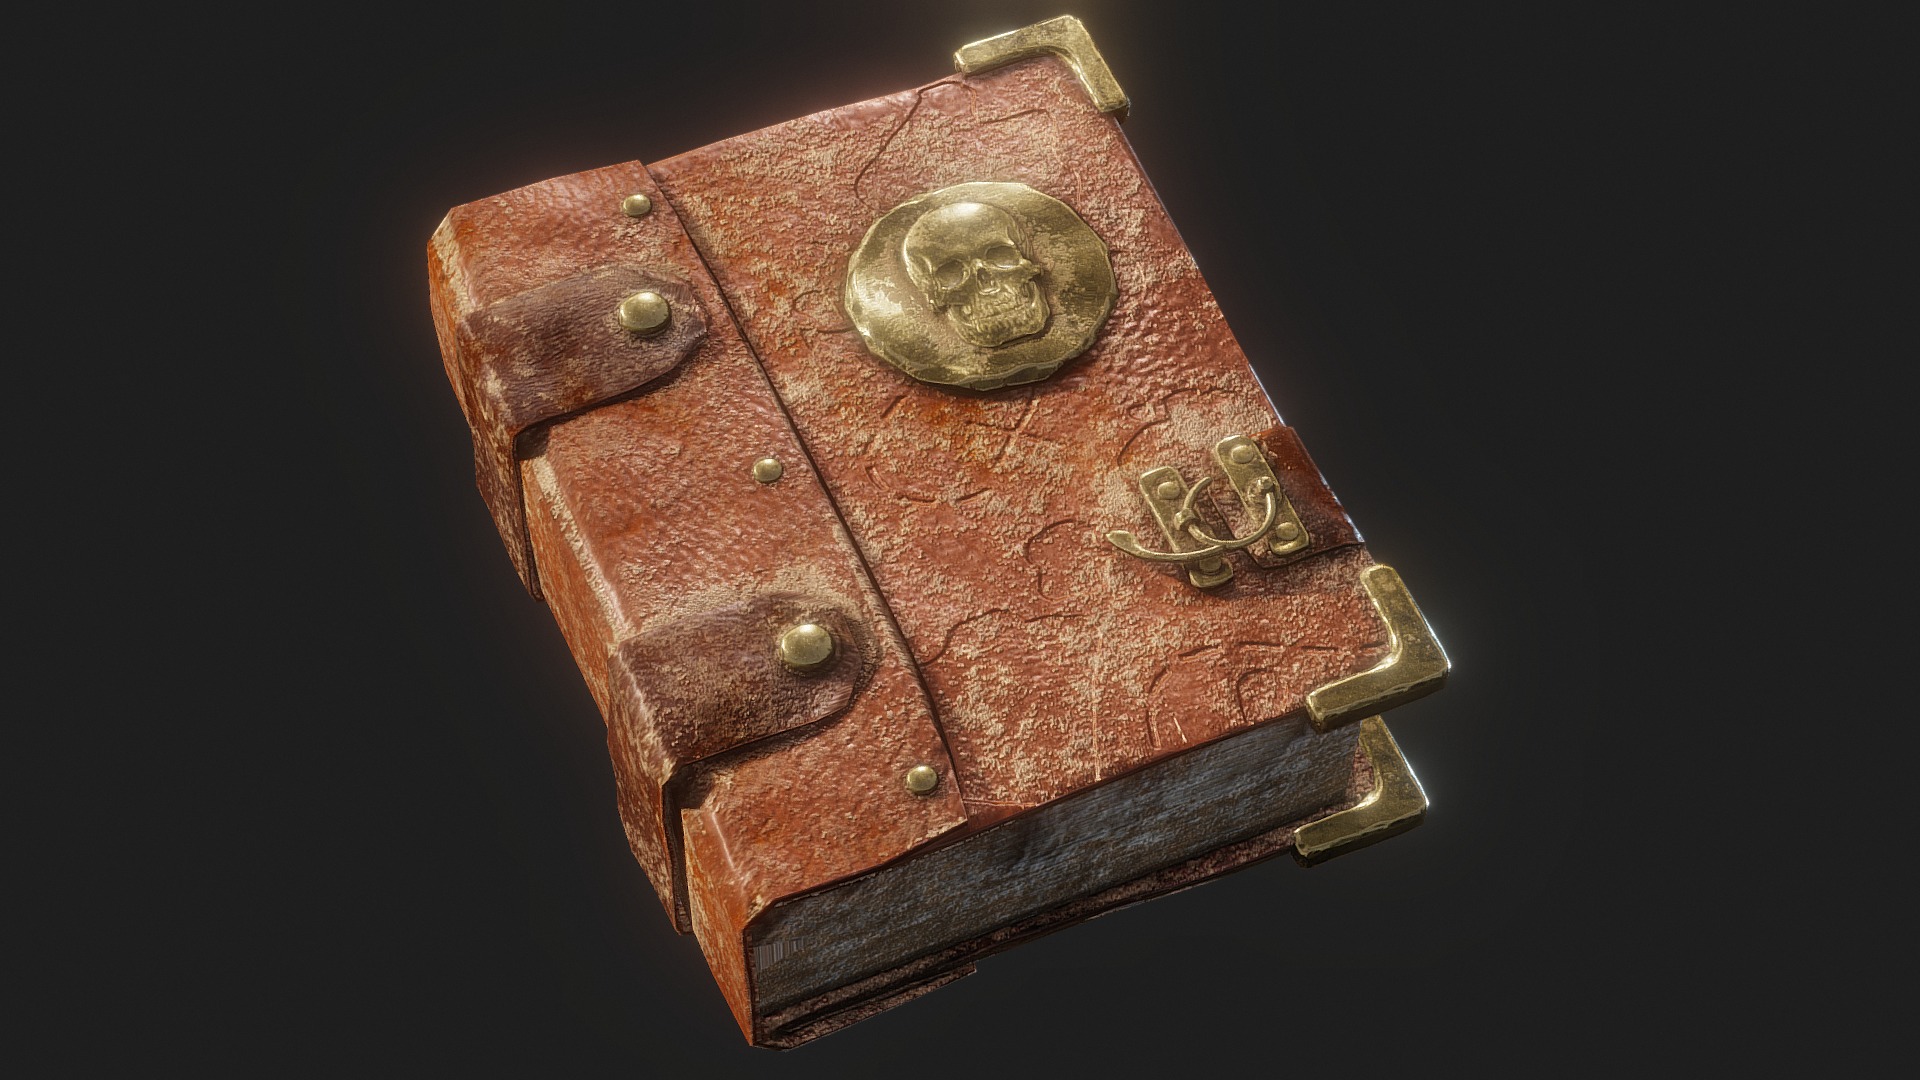 3D model Pirate Book - This is a 3D model of the Pirate Book. The 3D model is about a wooden box with a coin on top.